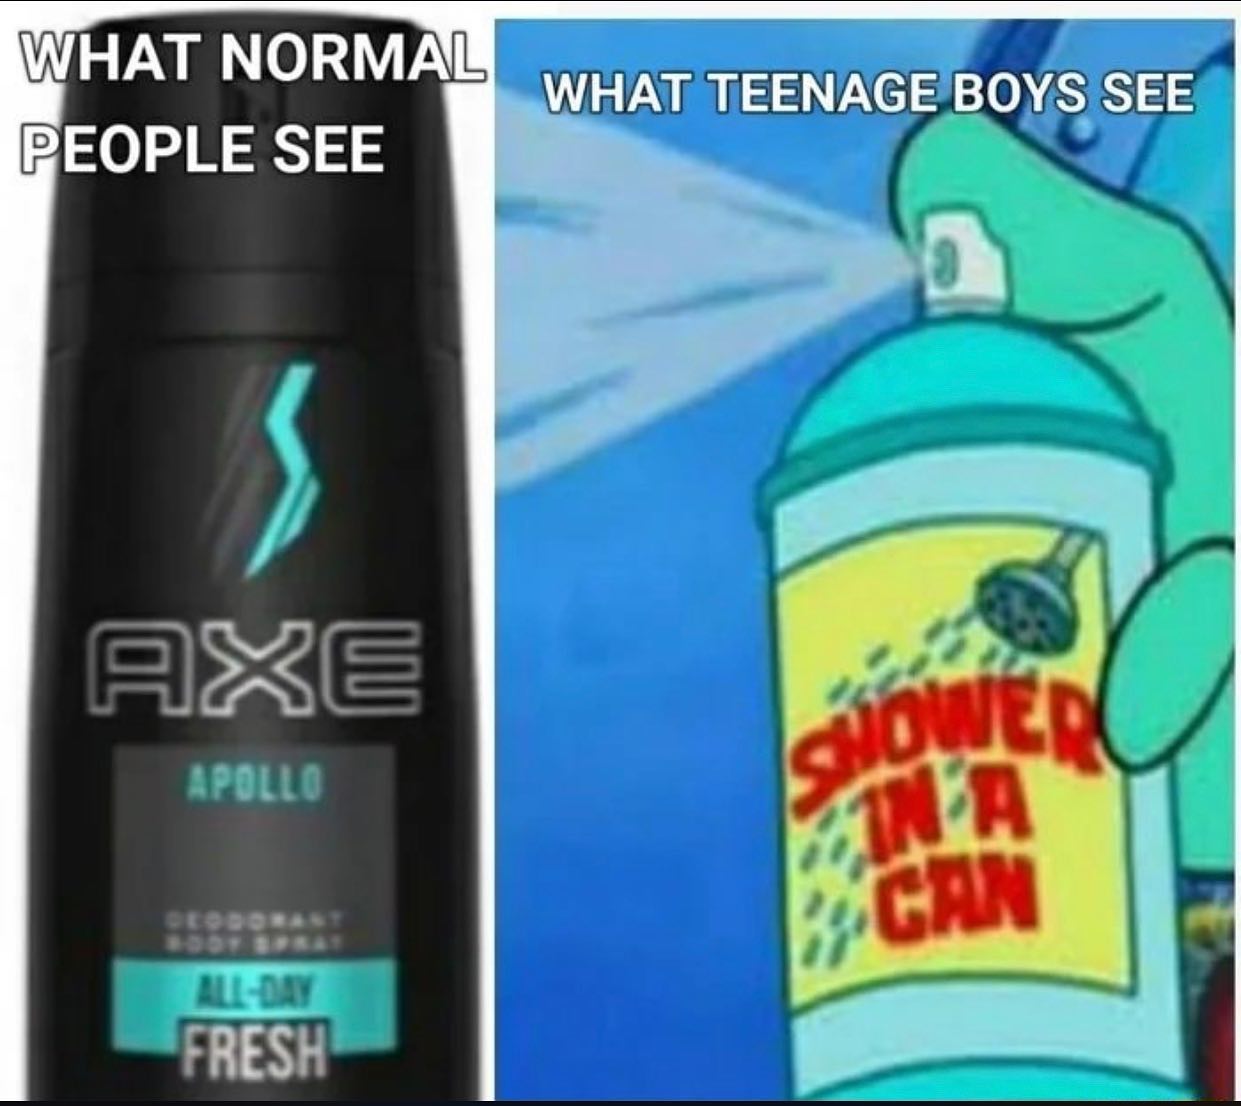 dank memes - funny memes spongebob - What Normal People See What Teenage Boys See Axe Apollo Ina Can AllDay Fresh